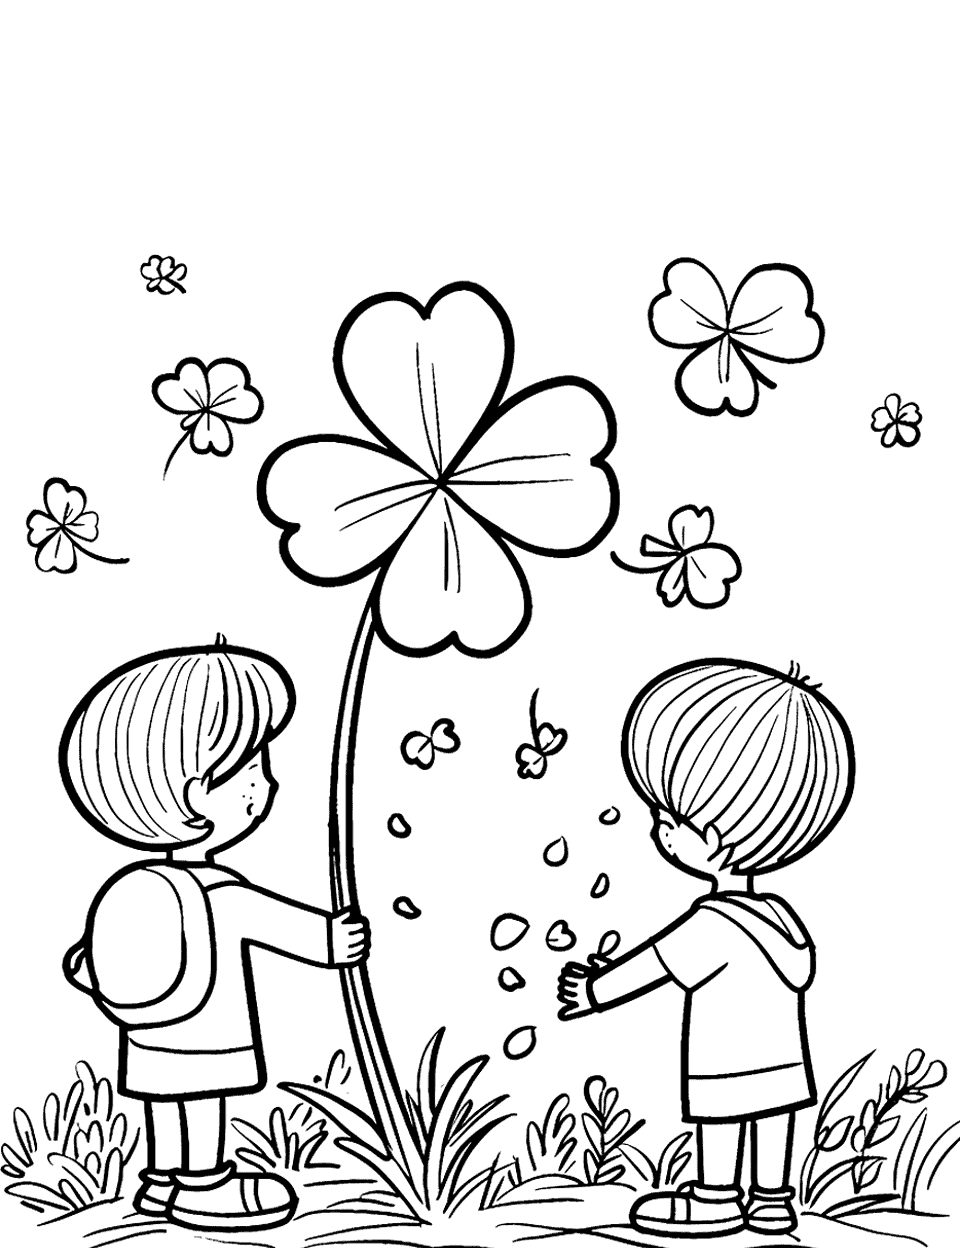 Four Leaf Clover Hunt Shamrock Coloring Page - Children searching in a field, finding a four-leaf clover.